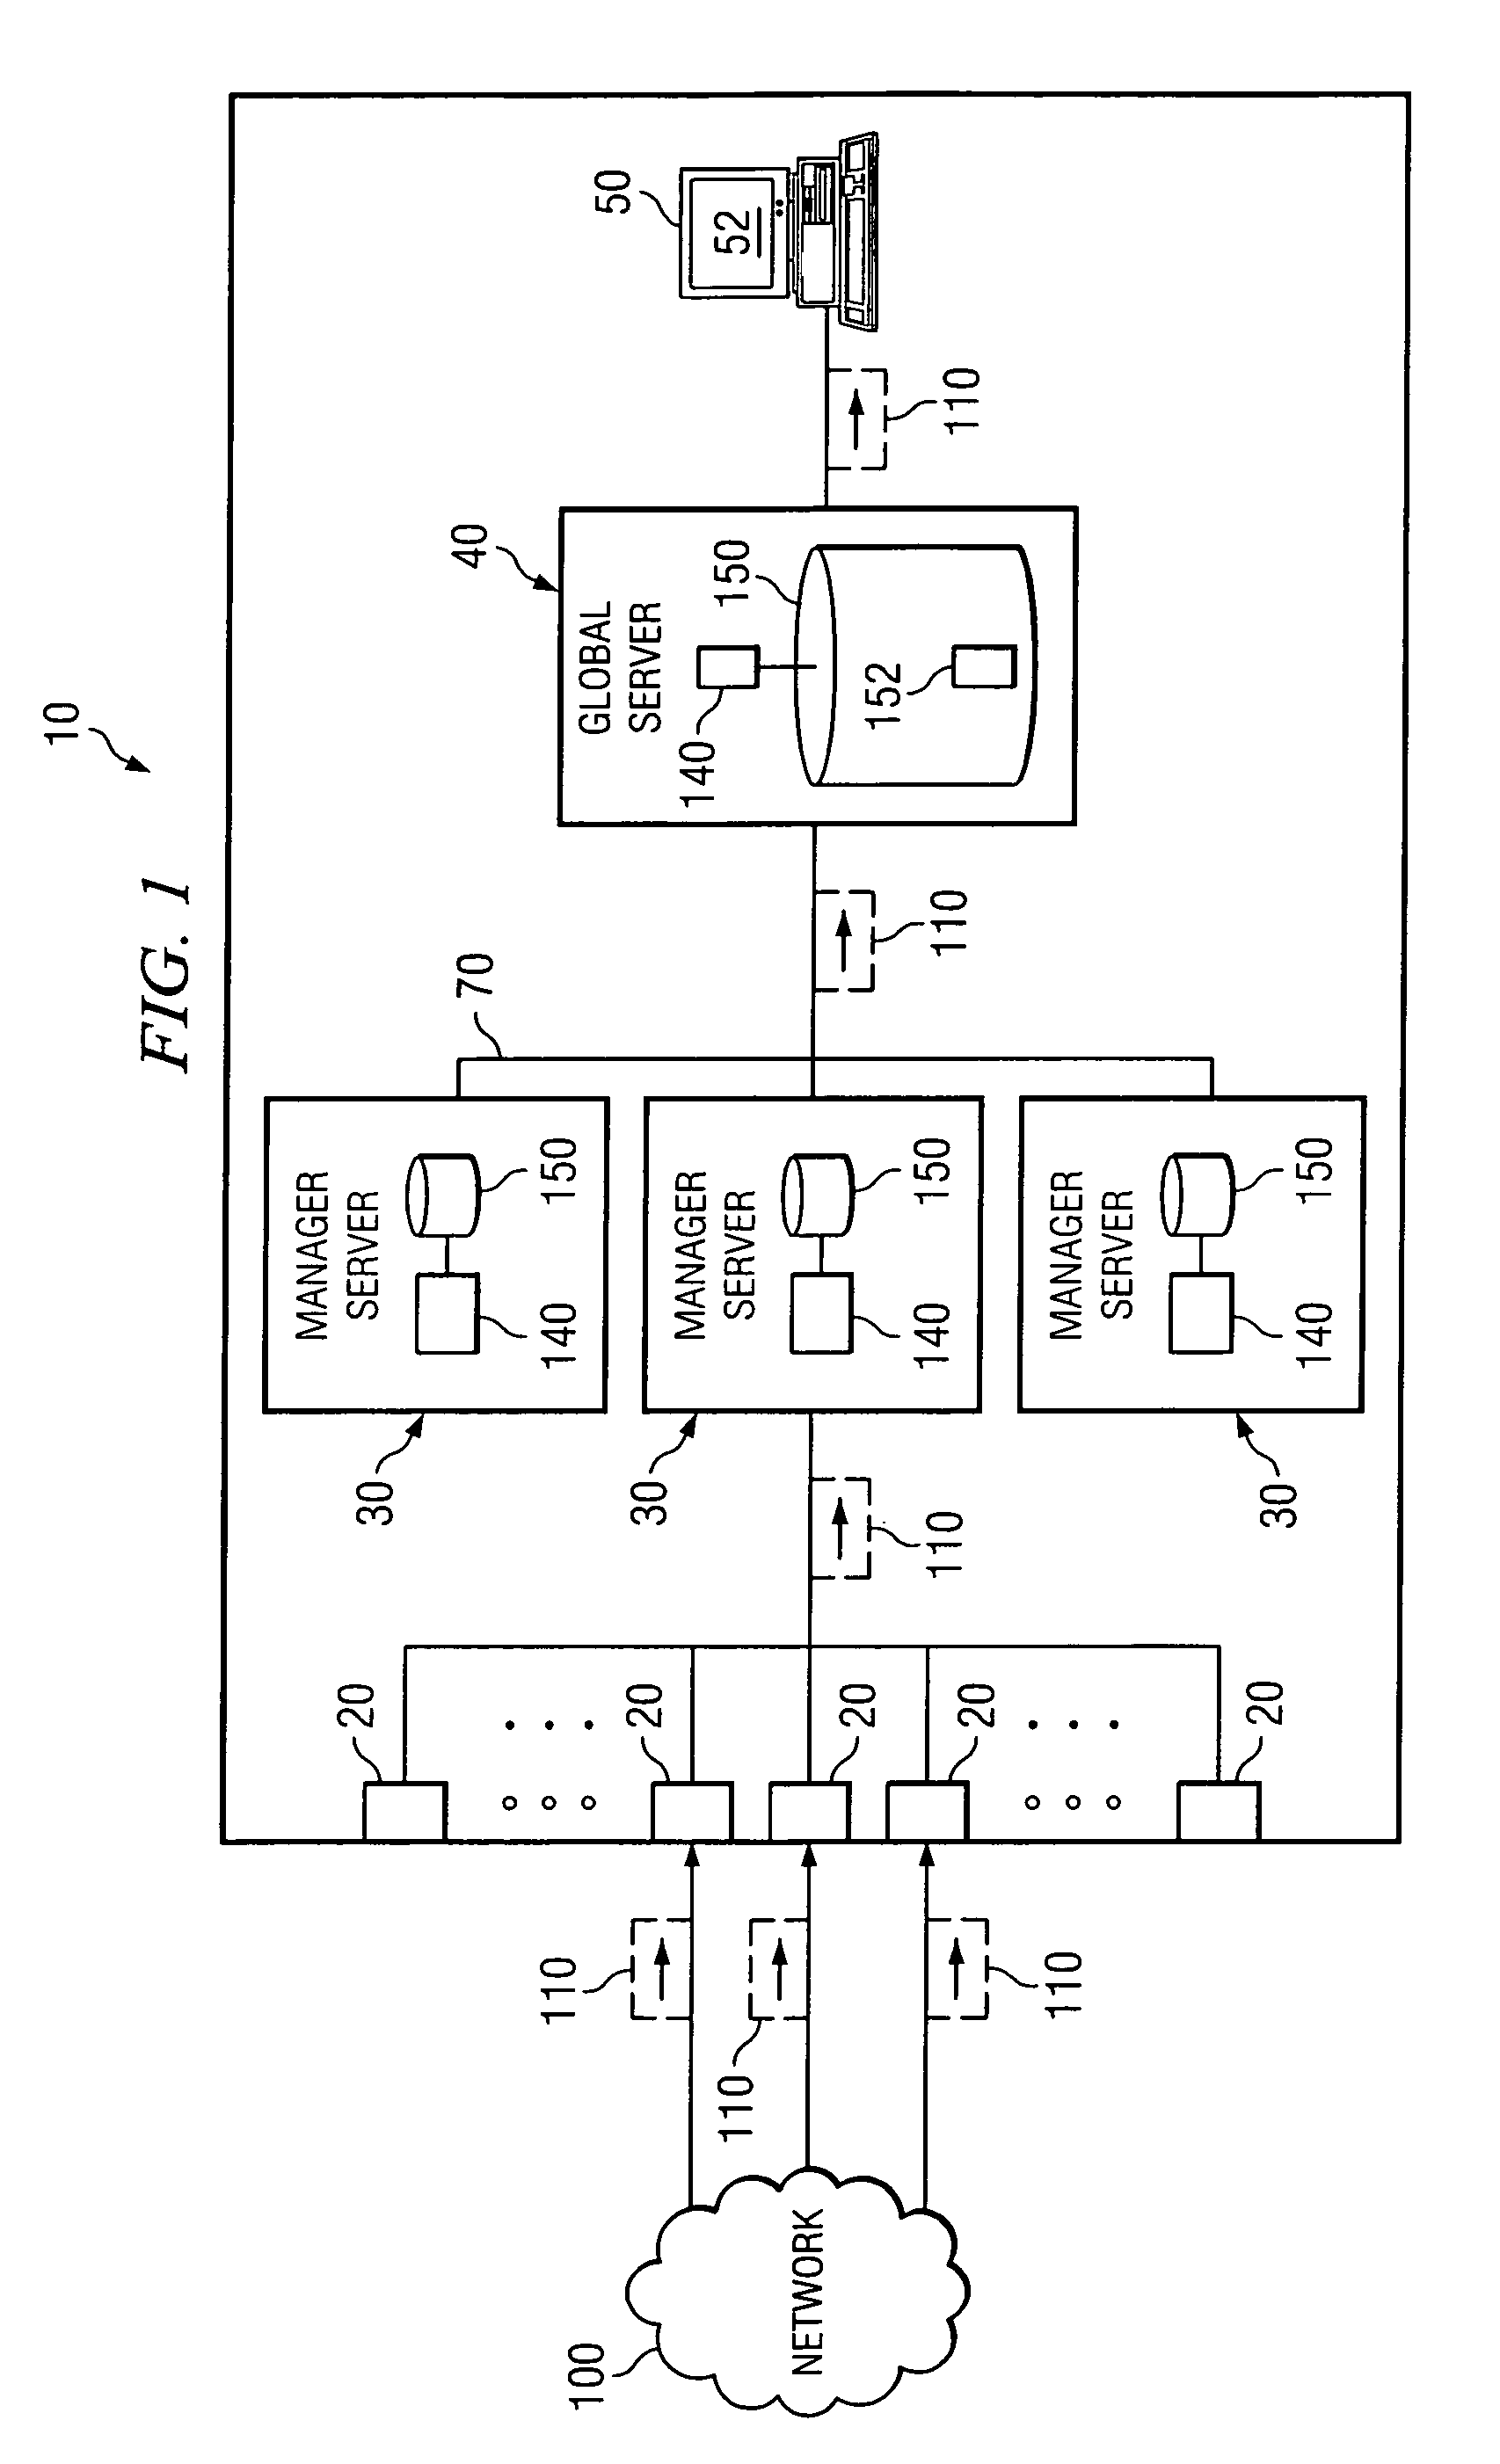 System and method for attacker attribution in a network security system